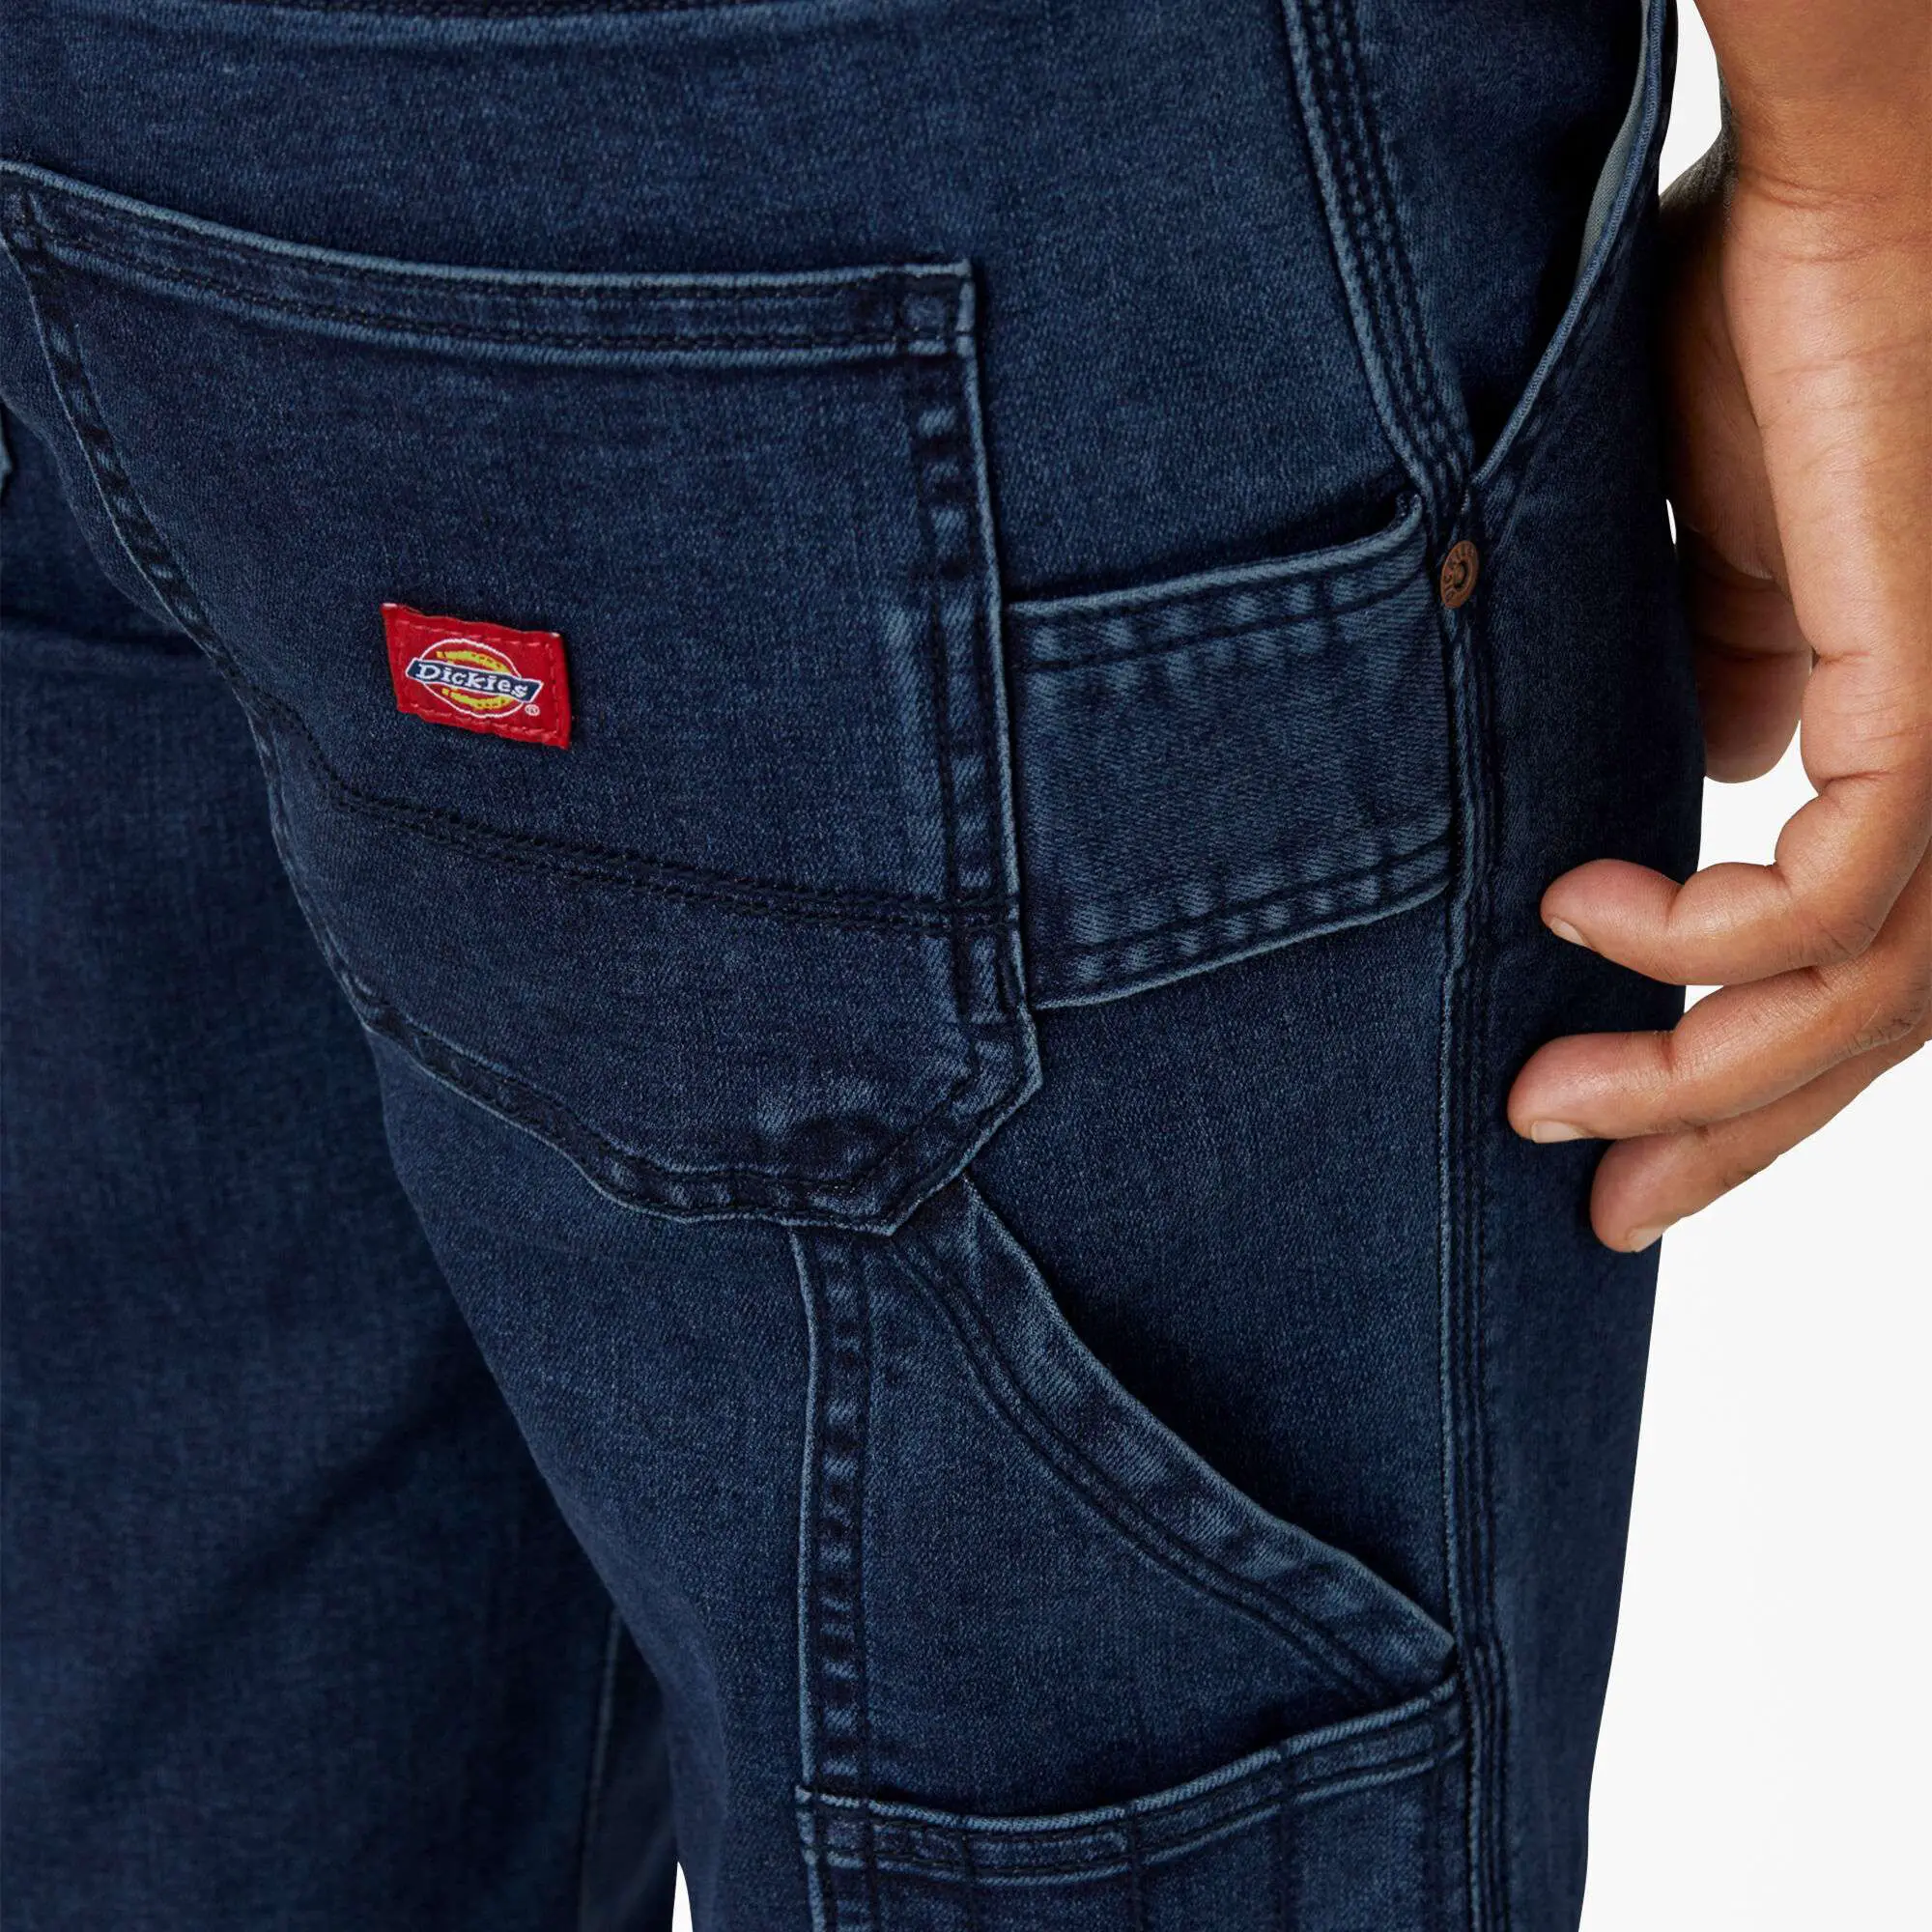 Factors to Consider When Buying Dickies Jeans